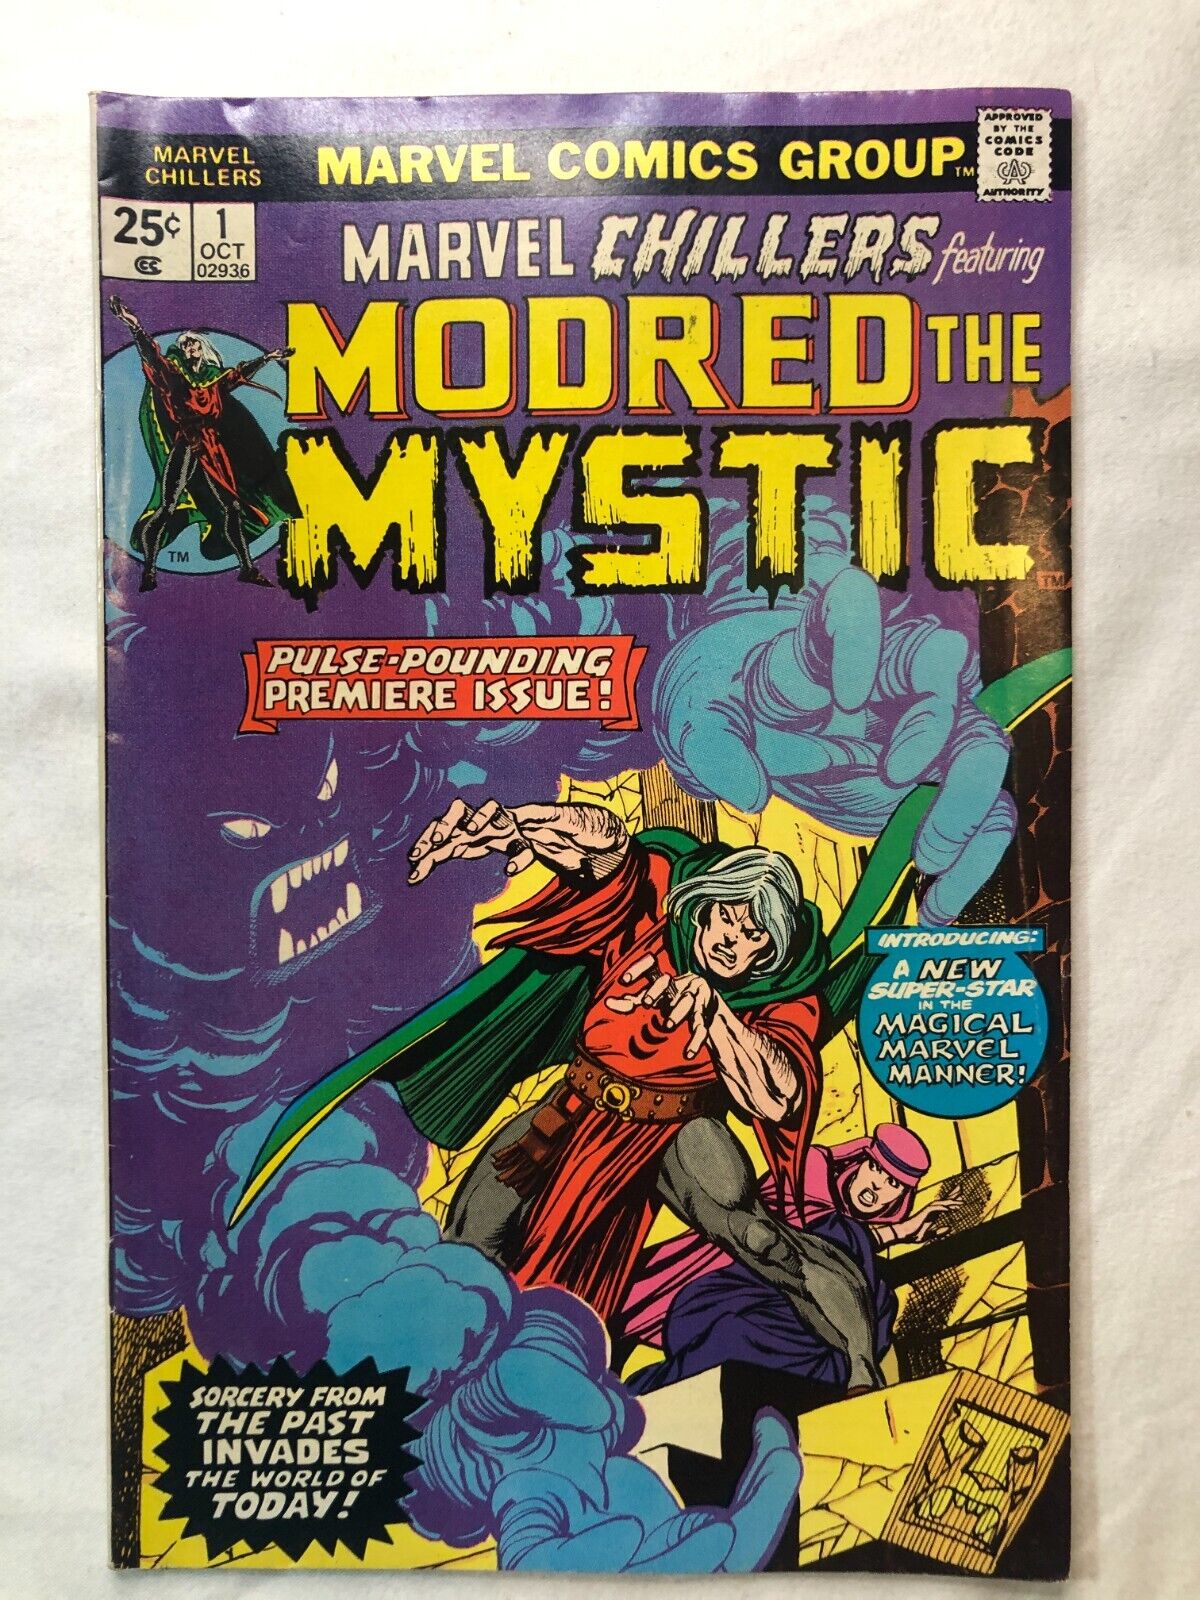 Marvel Chillers #1 Modred the Mystic Vintage Silver Age 1975 Key Issue Very Nice